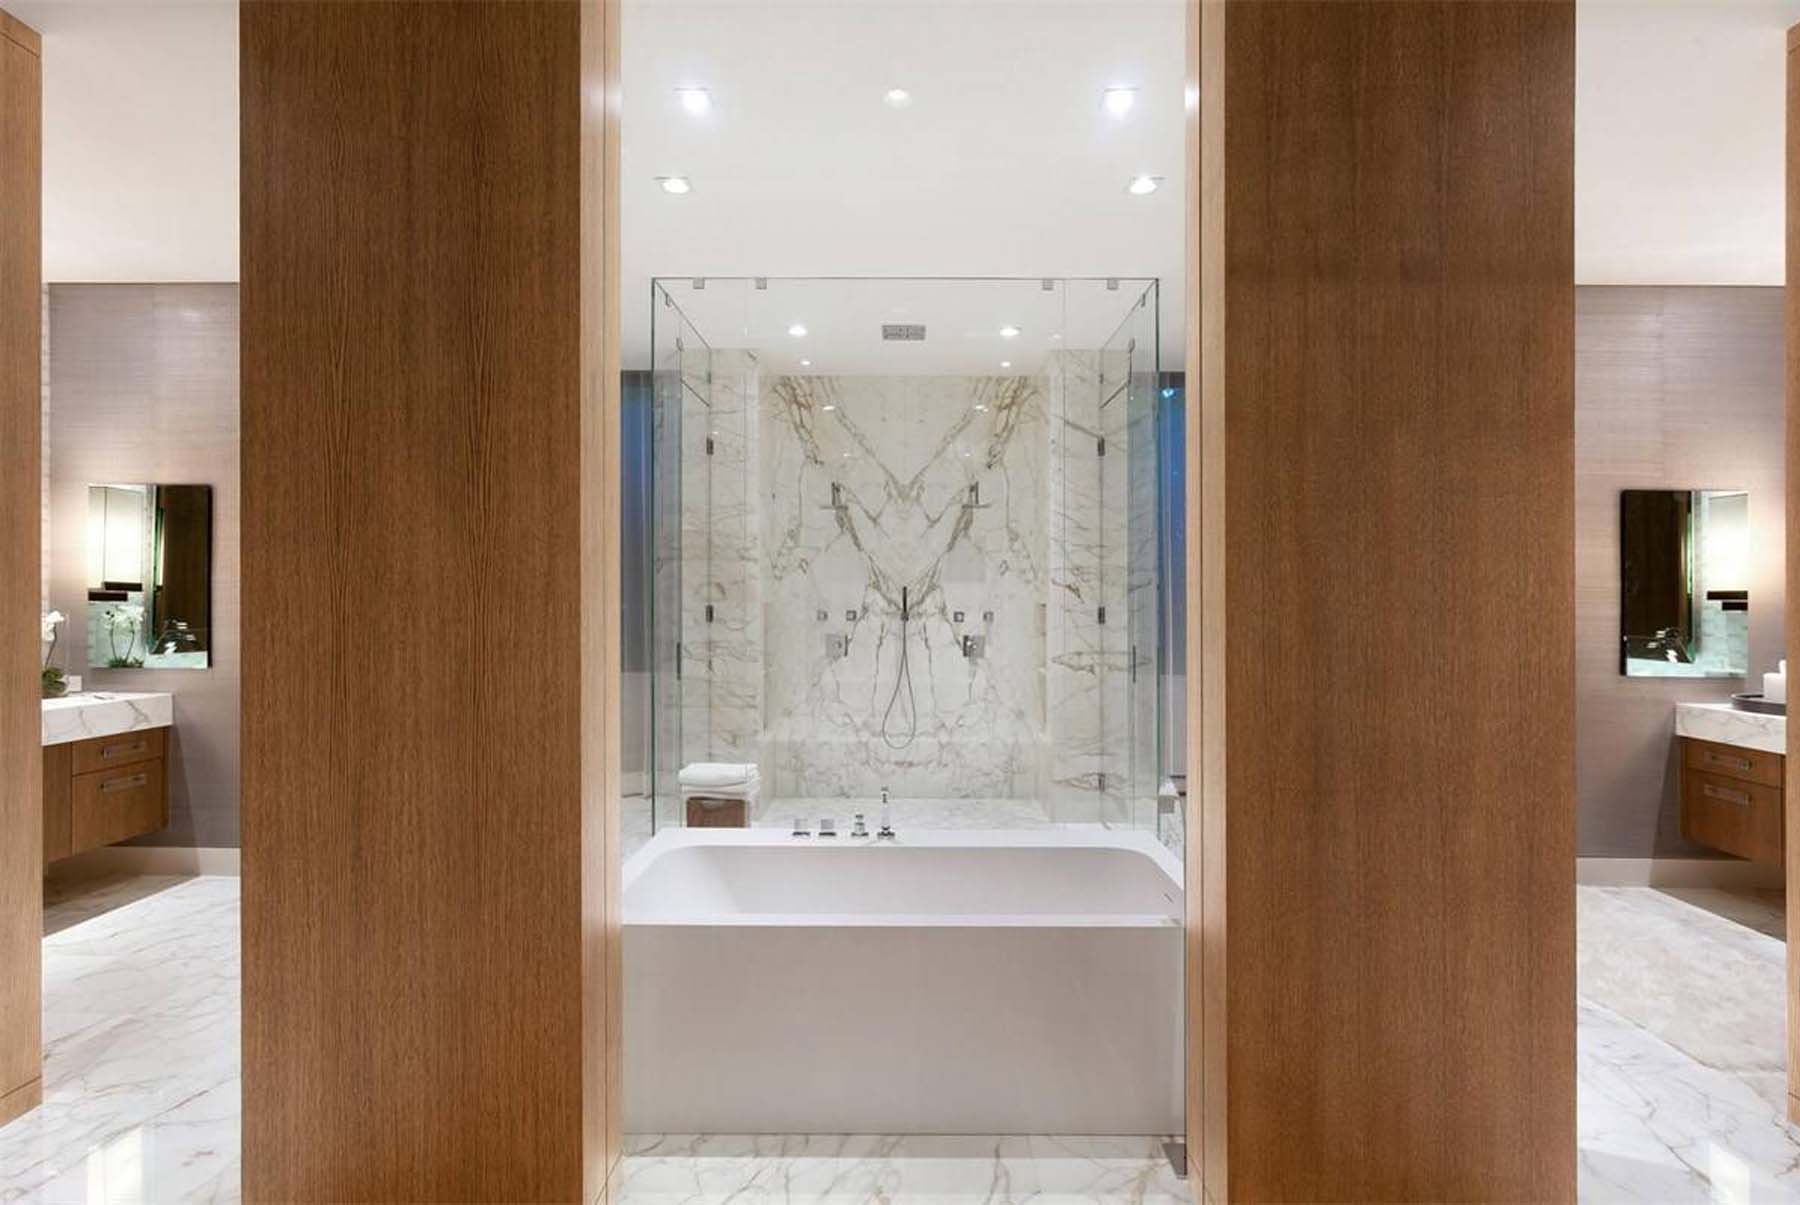 Beautiful master bathroom with marble and real wood. center soaking tub and glass shower.